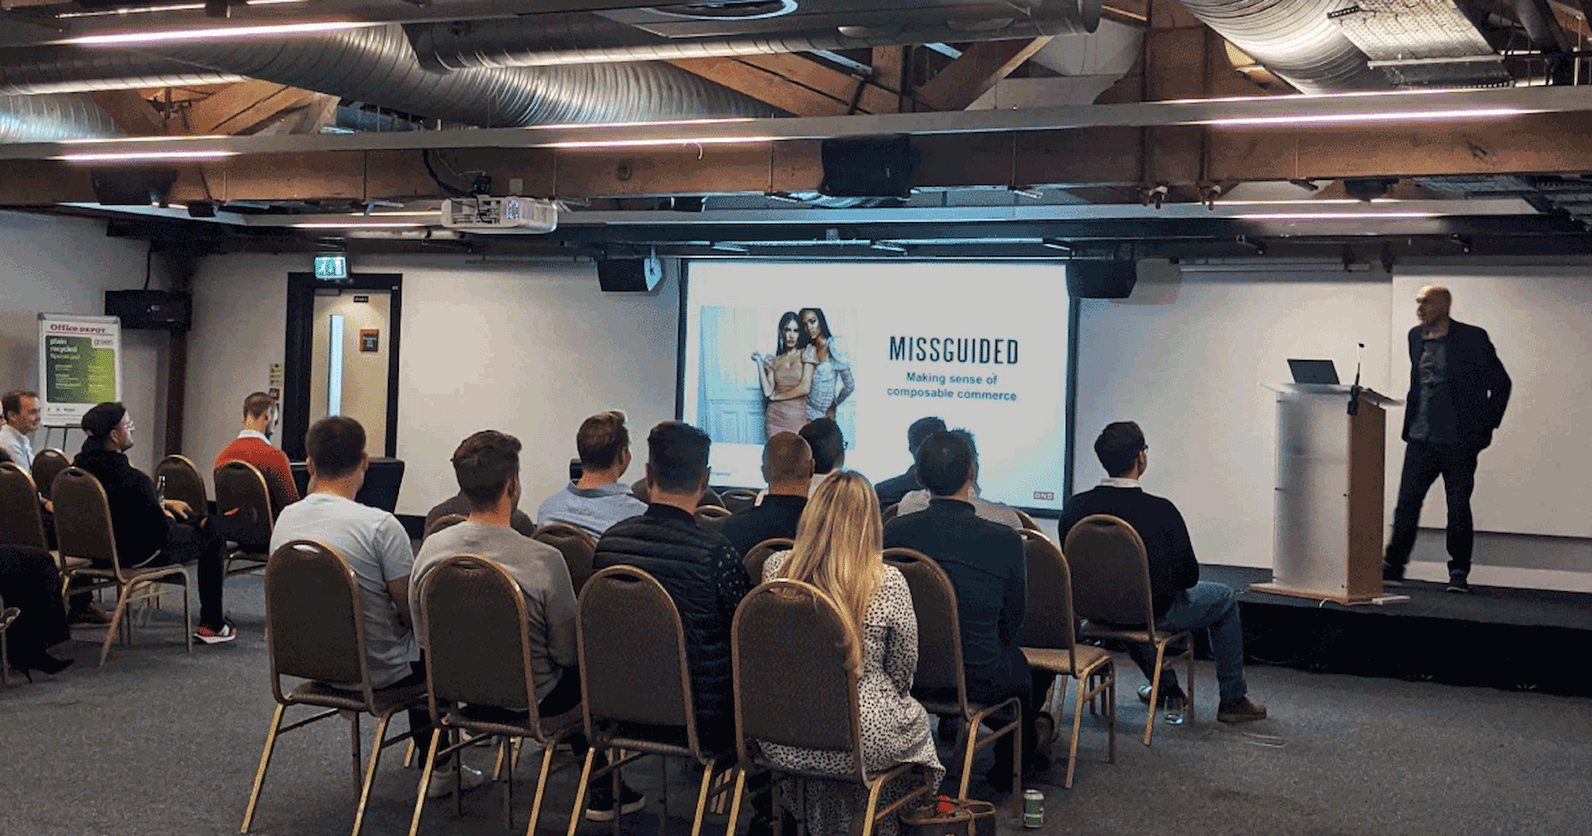 Working towards composable commerce with Missguided [Event] (1)